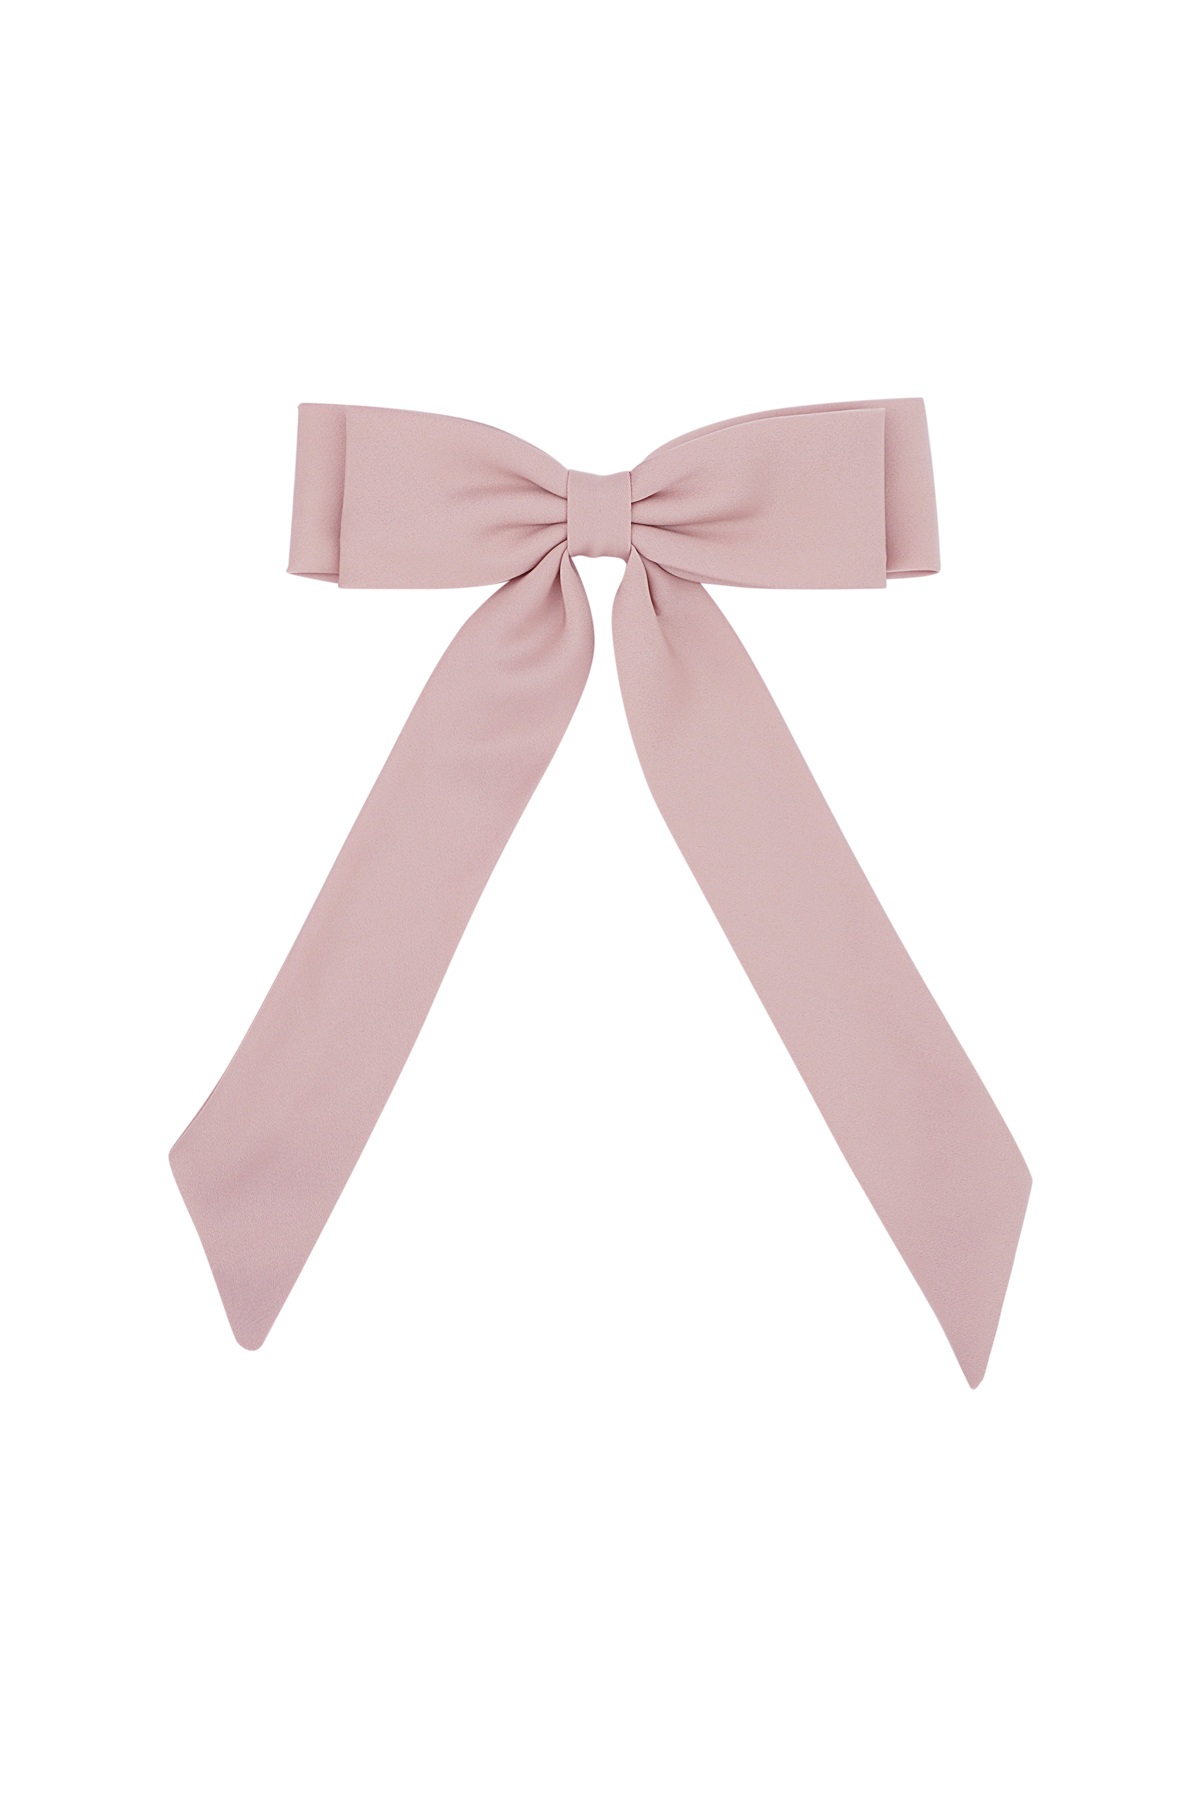 Noeud à cheveux basic baby - rose h5 